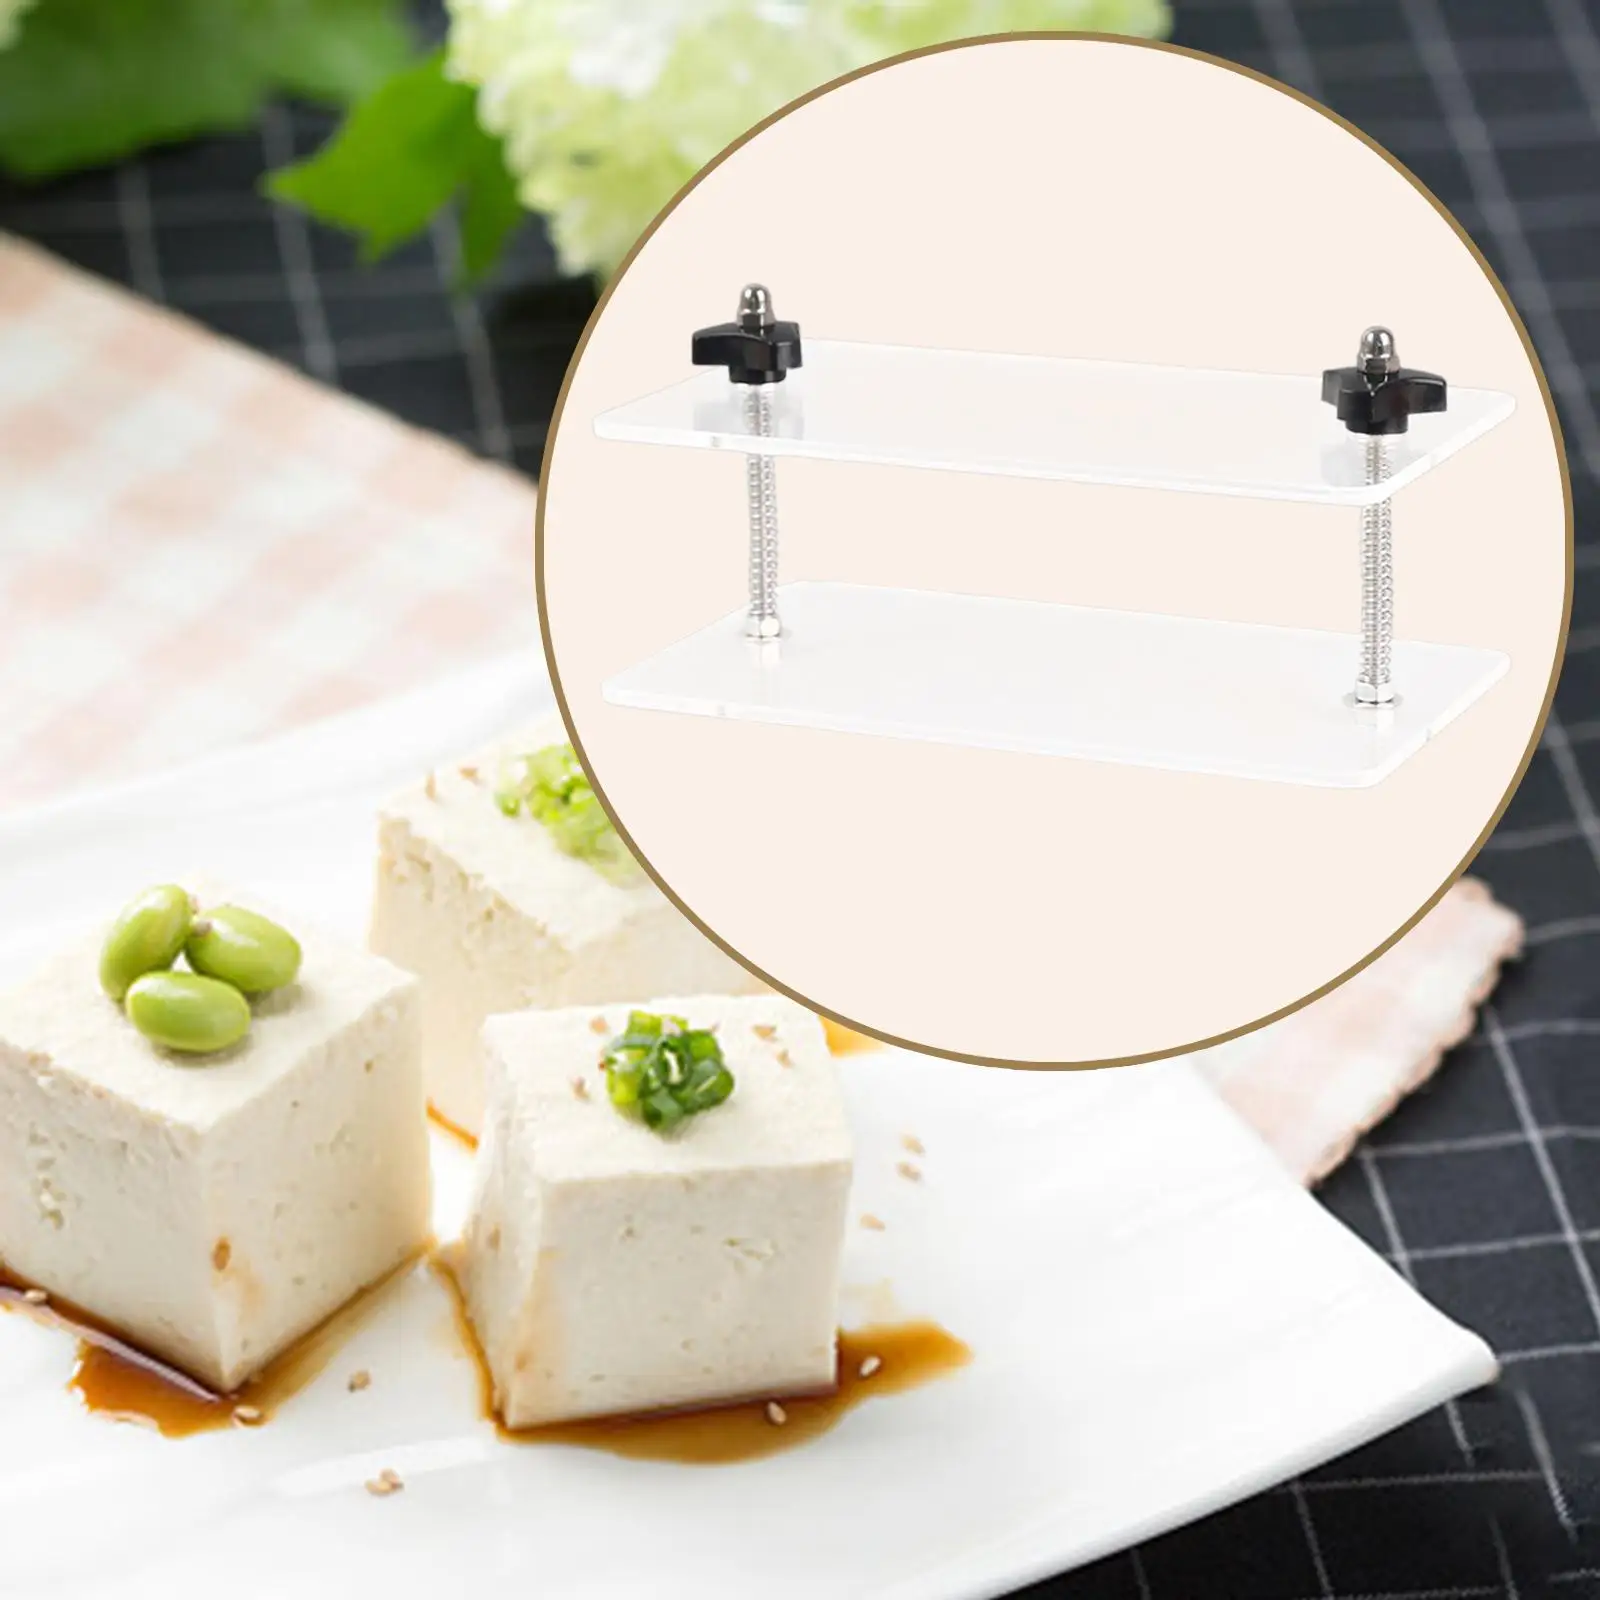 Tofu Maker Attachments Handmade Tofu Pressing for Paneer Dining Room Camping